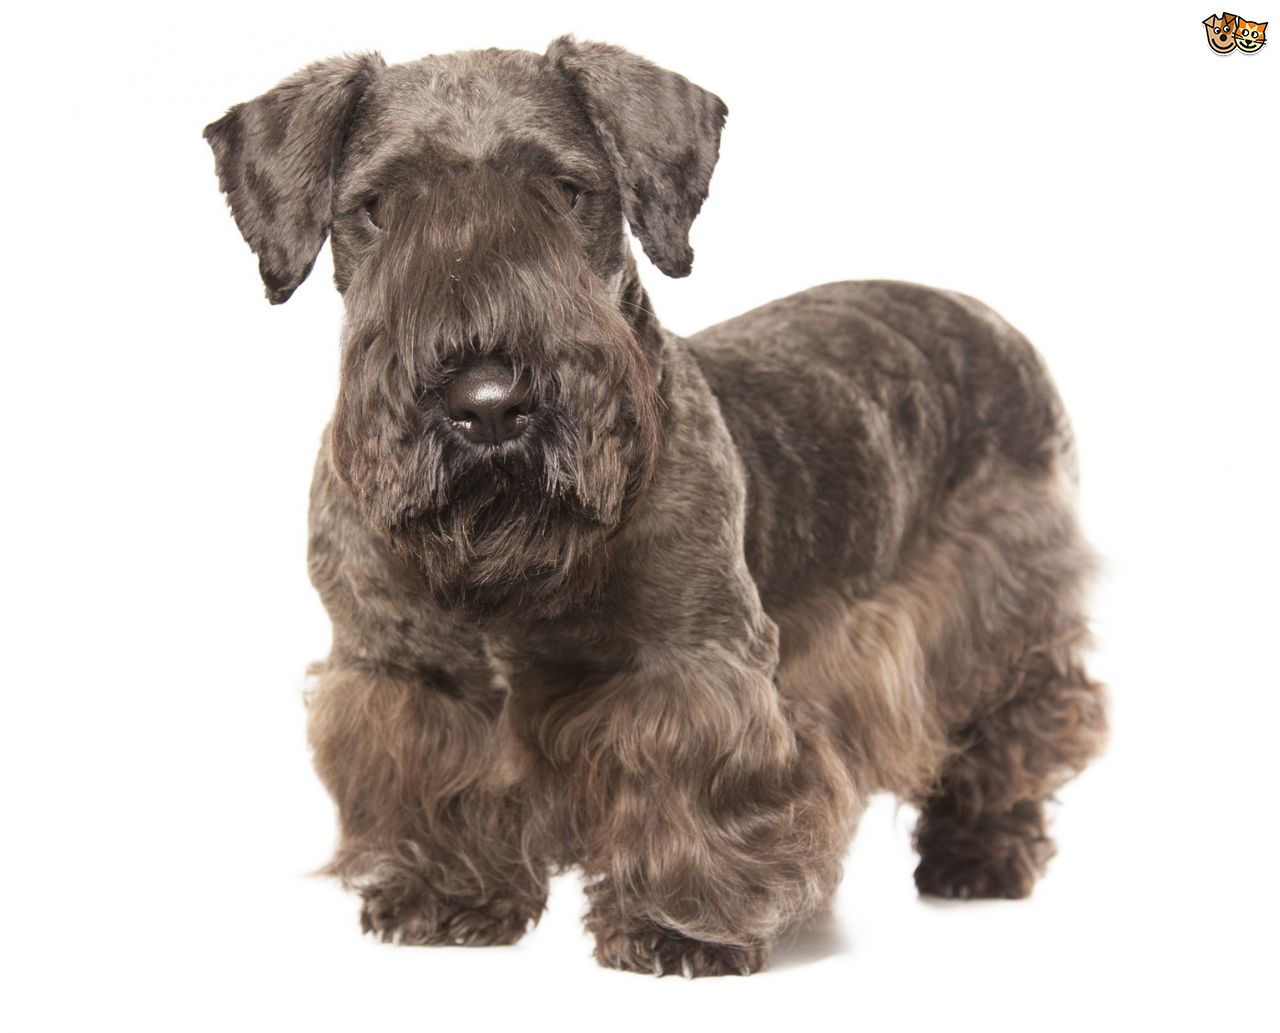 Cesky Terrier Puppies: Cesky The Breed Standard And Appearance Of The Cesky Terrier